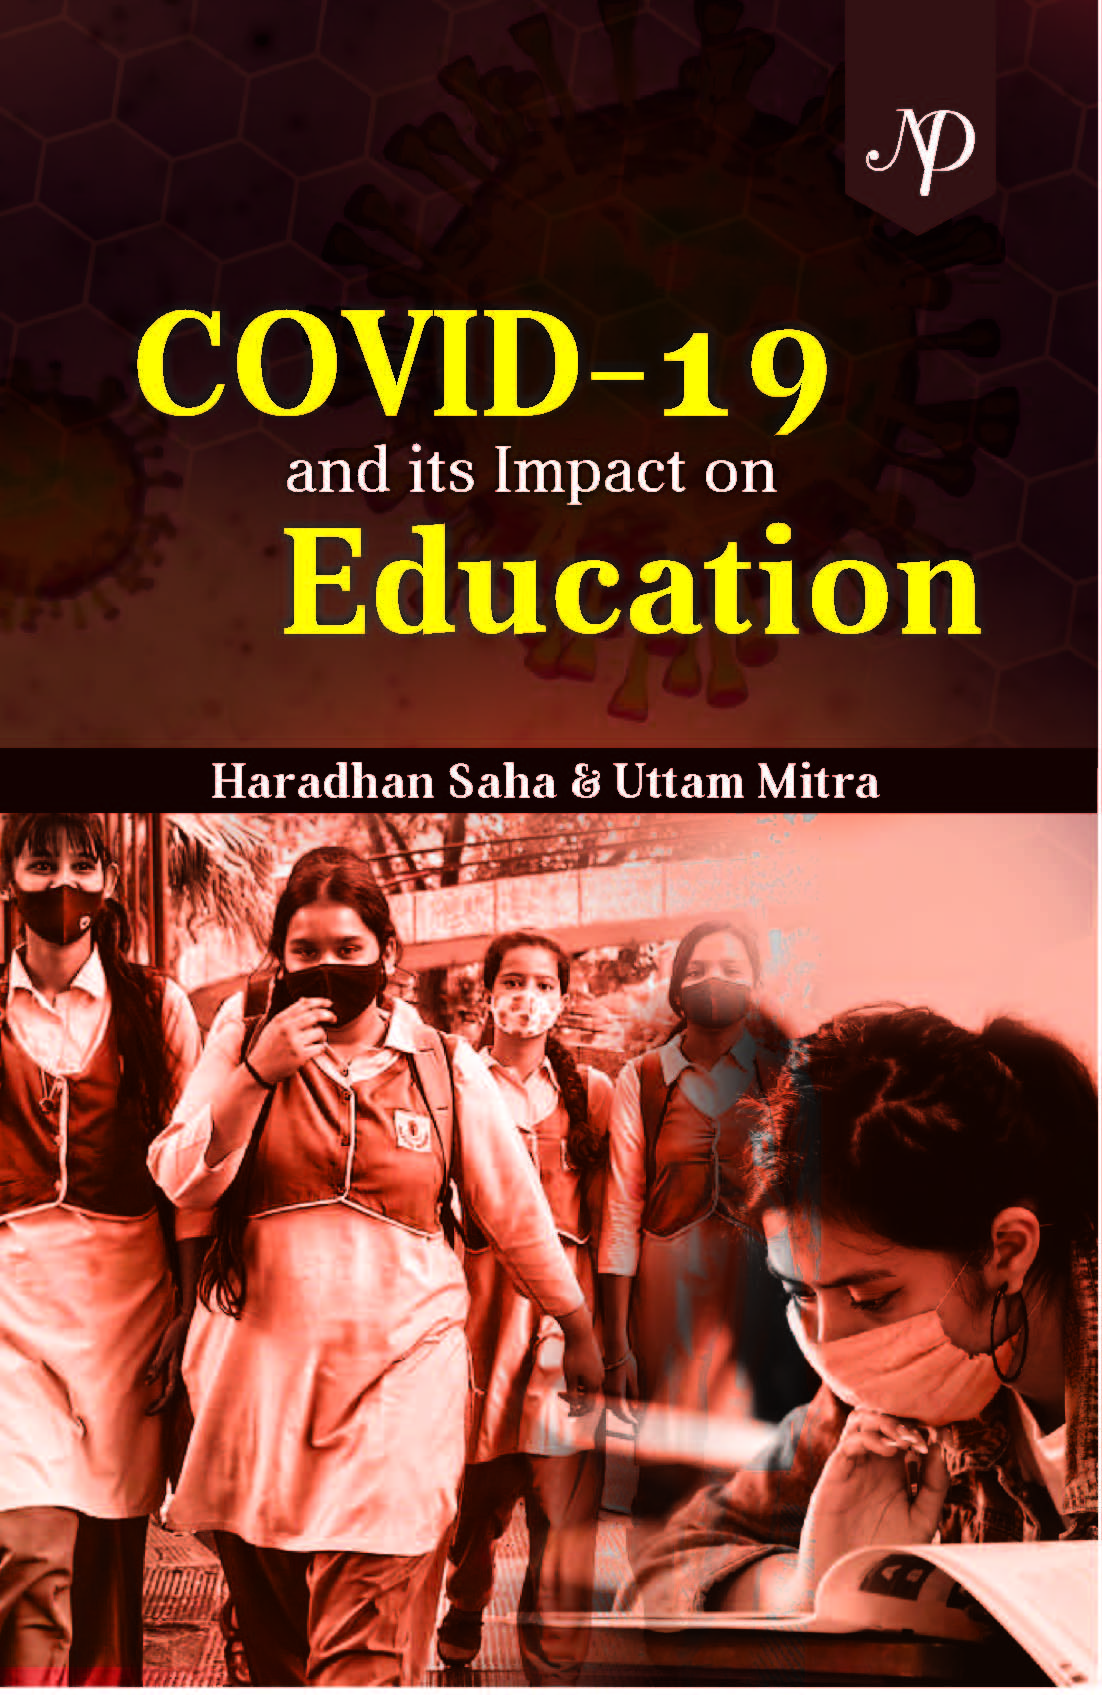 COVID-19 and its Impact on Education